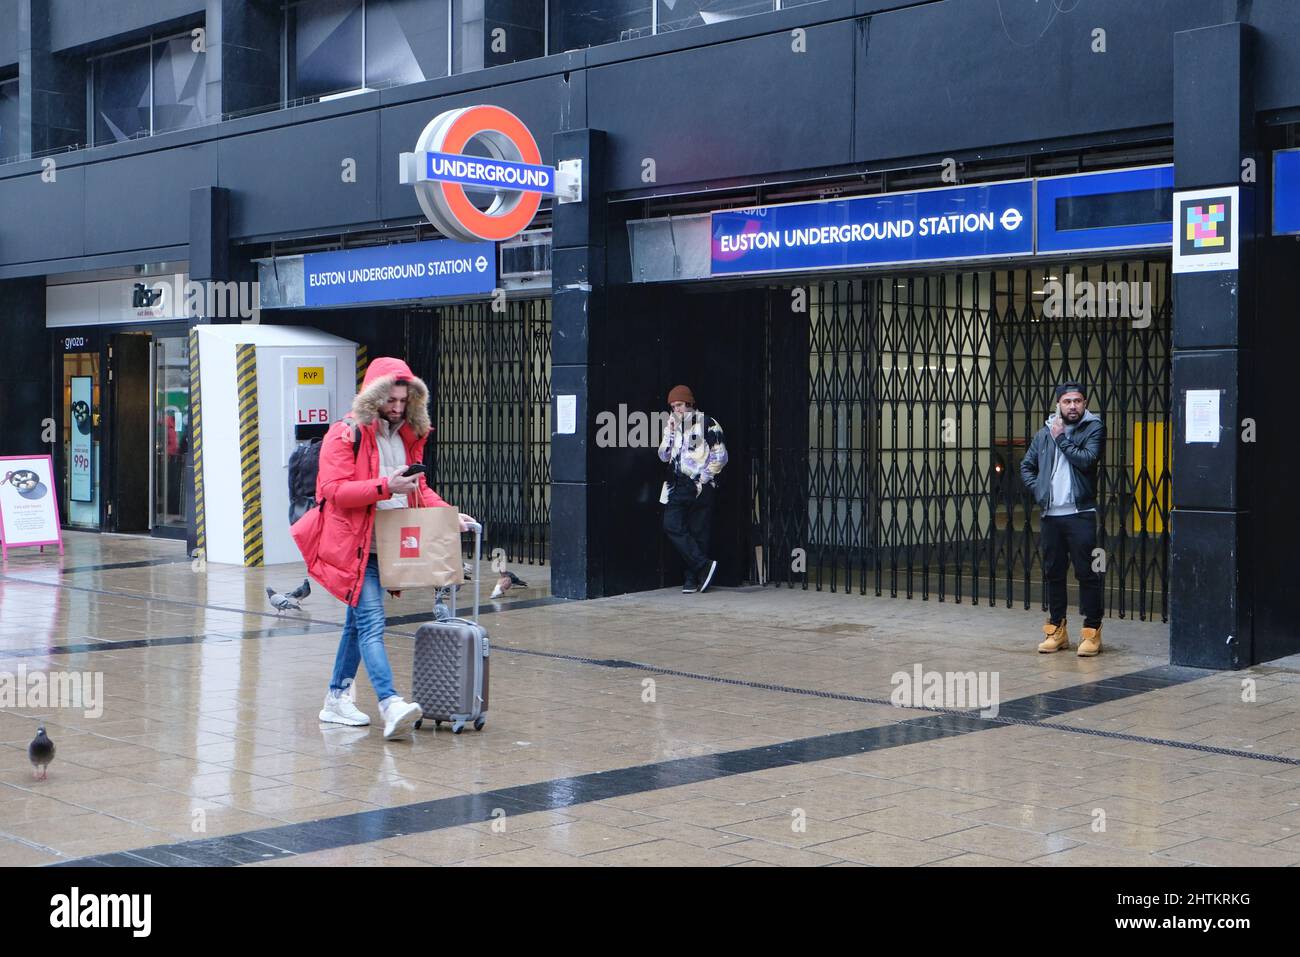 London, UK, 1st Mar, 2022. Members of the public walk past a shuttered Euston Underground Station as visitors and commuters found alternative ways to complete their journey this afternoon, on foot, via bus, taxi or cycling, amid a Tube strike affecting all services for 24 hours. The strike called by the RMT Union over threats of 600 job losses and pension cuts saw 10,000 staff stage a walkout. Credit: Eleventh Hour Photography/Alamy Live News Stock Photo